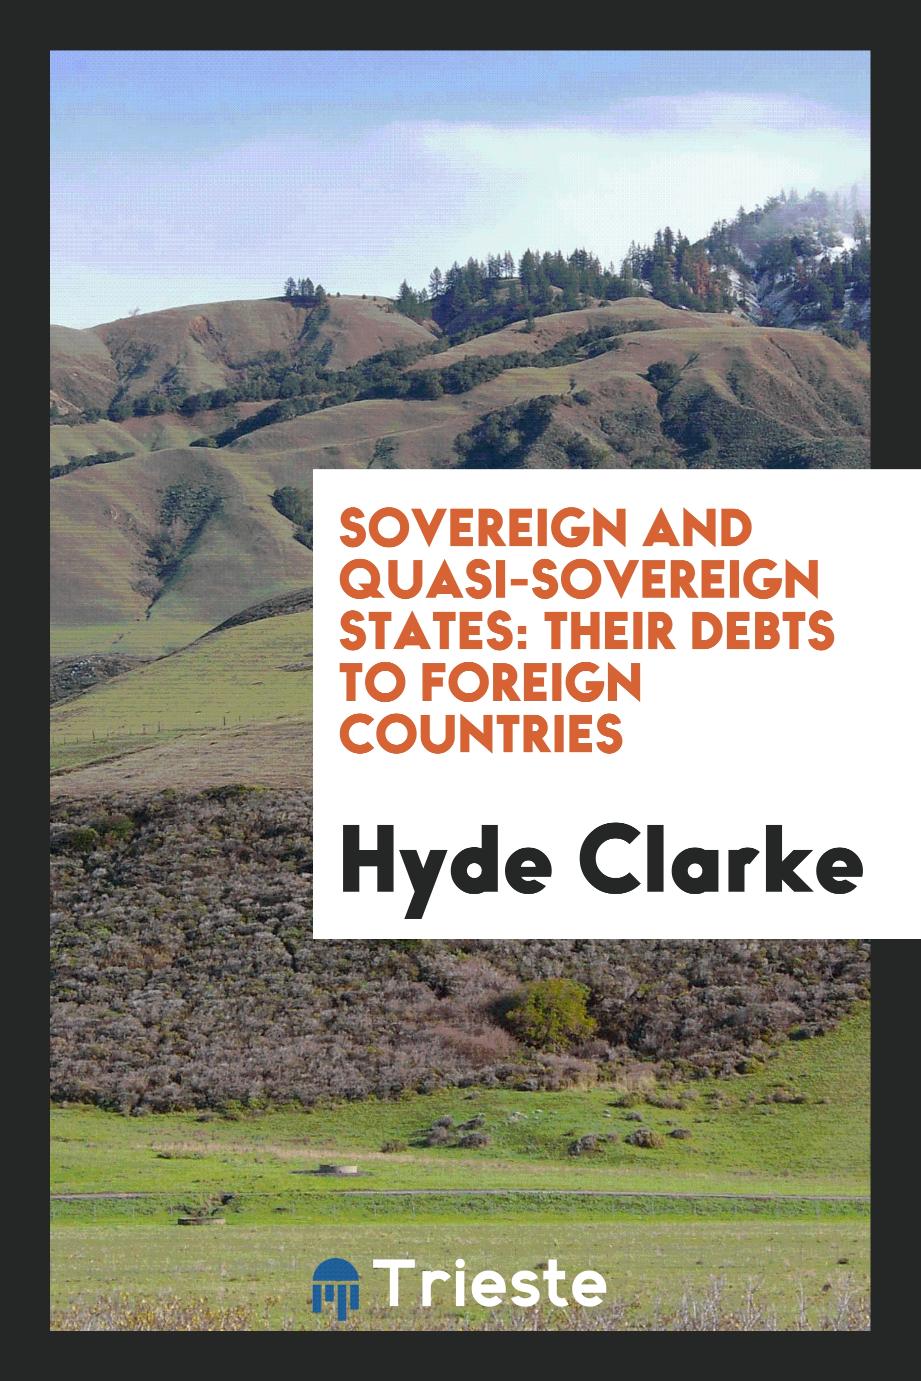 Sovereign and quasi-sovereign states: their debts to foreign countries